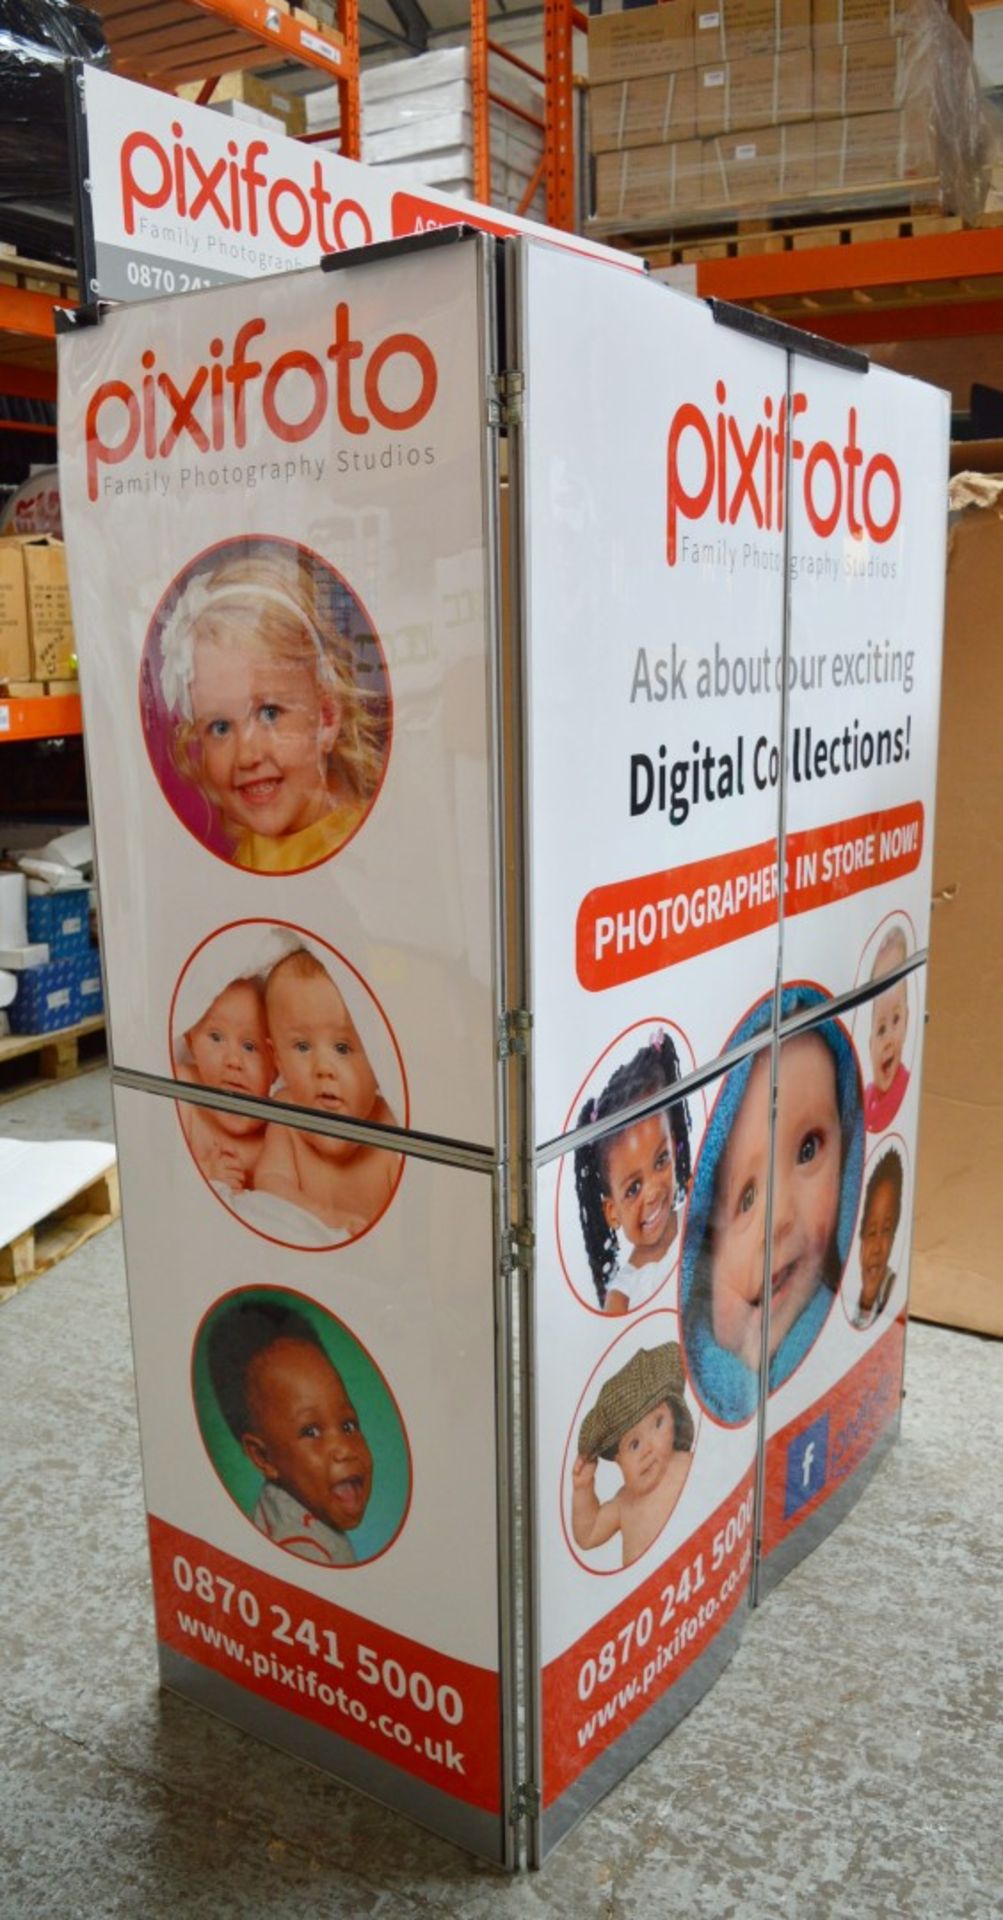 1 x Pixifoto Mobile Flash Photography Booth - Ideal For Use in Shopping Centers, Weddings, - Image 6 of 16